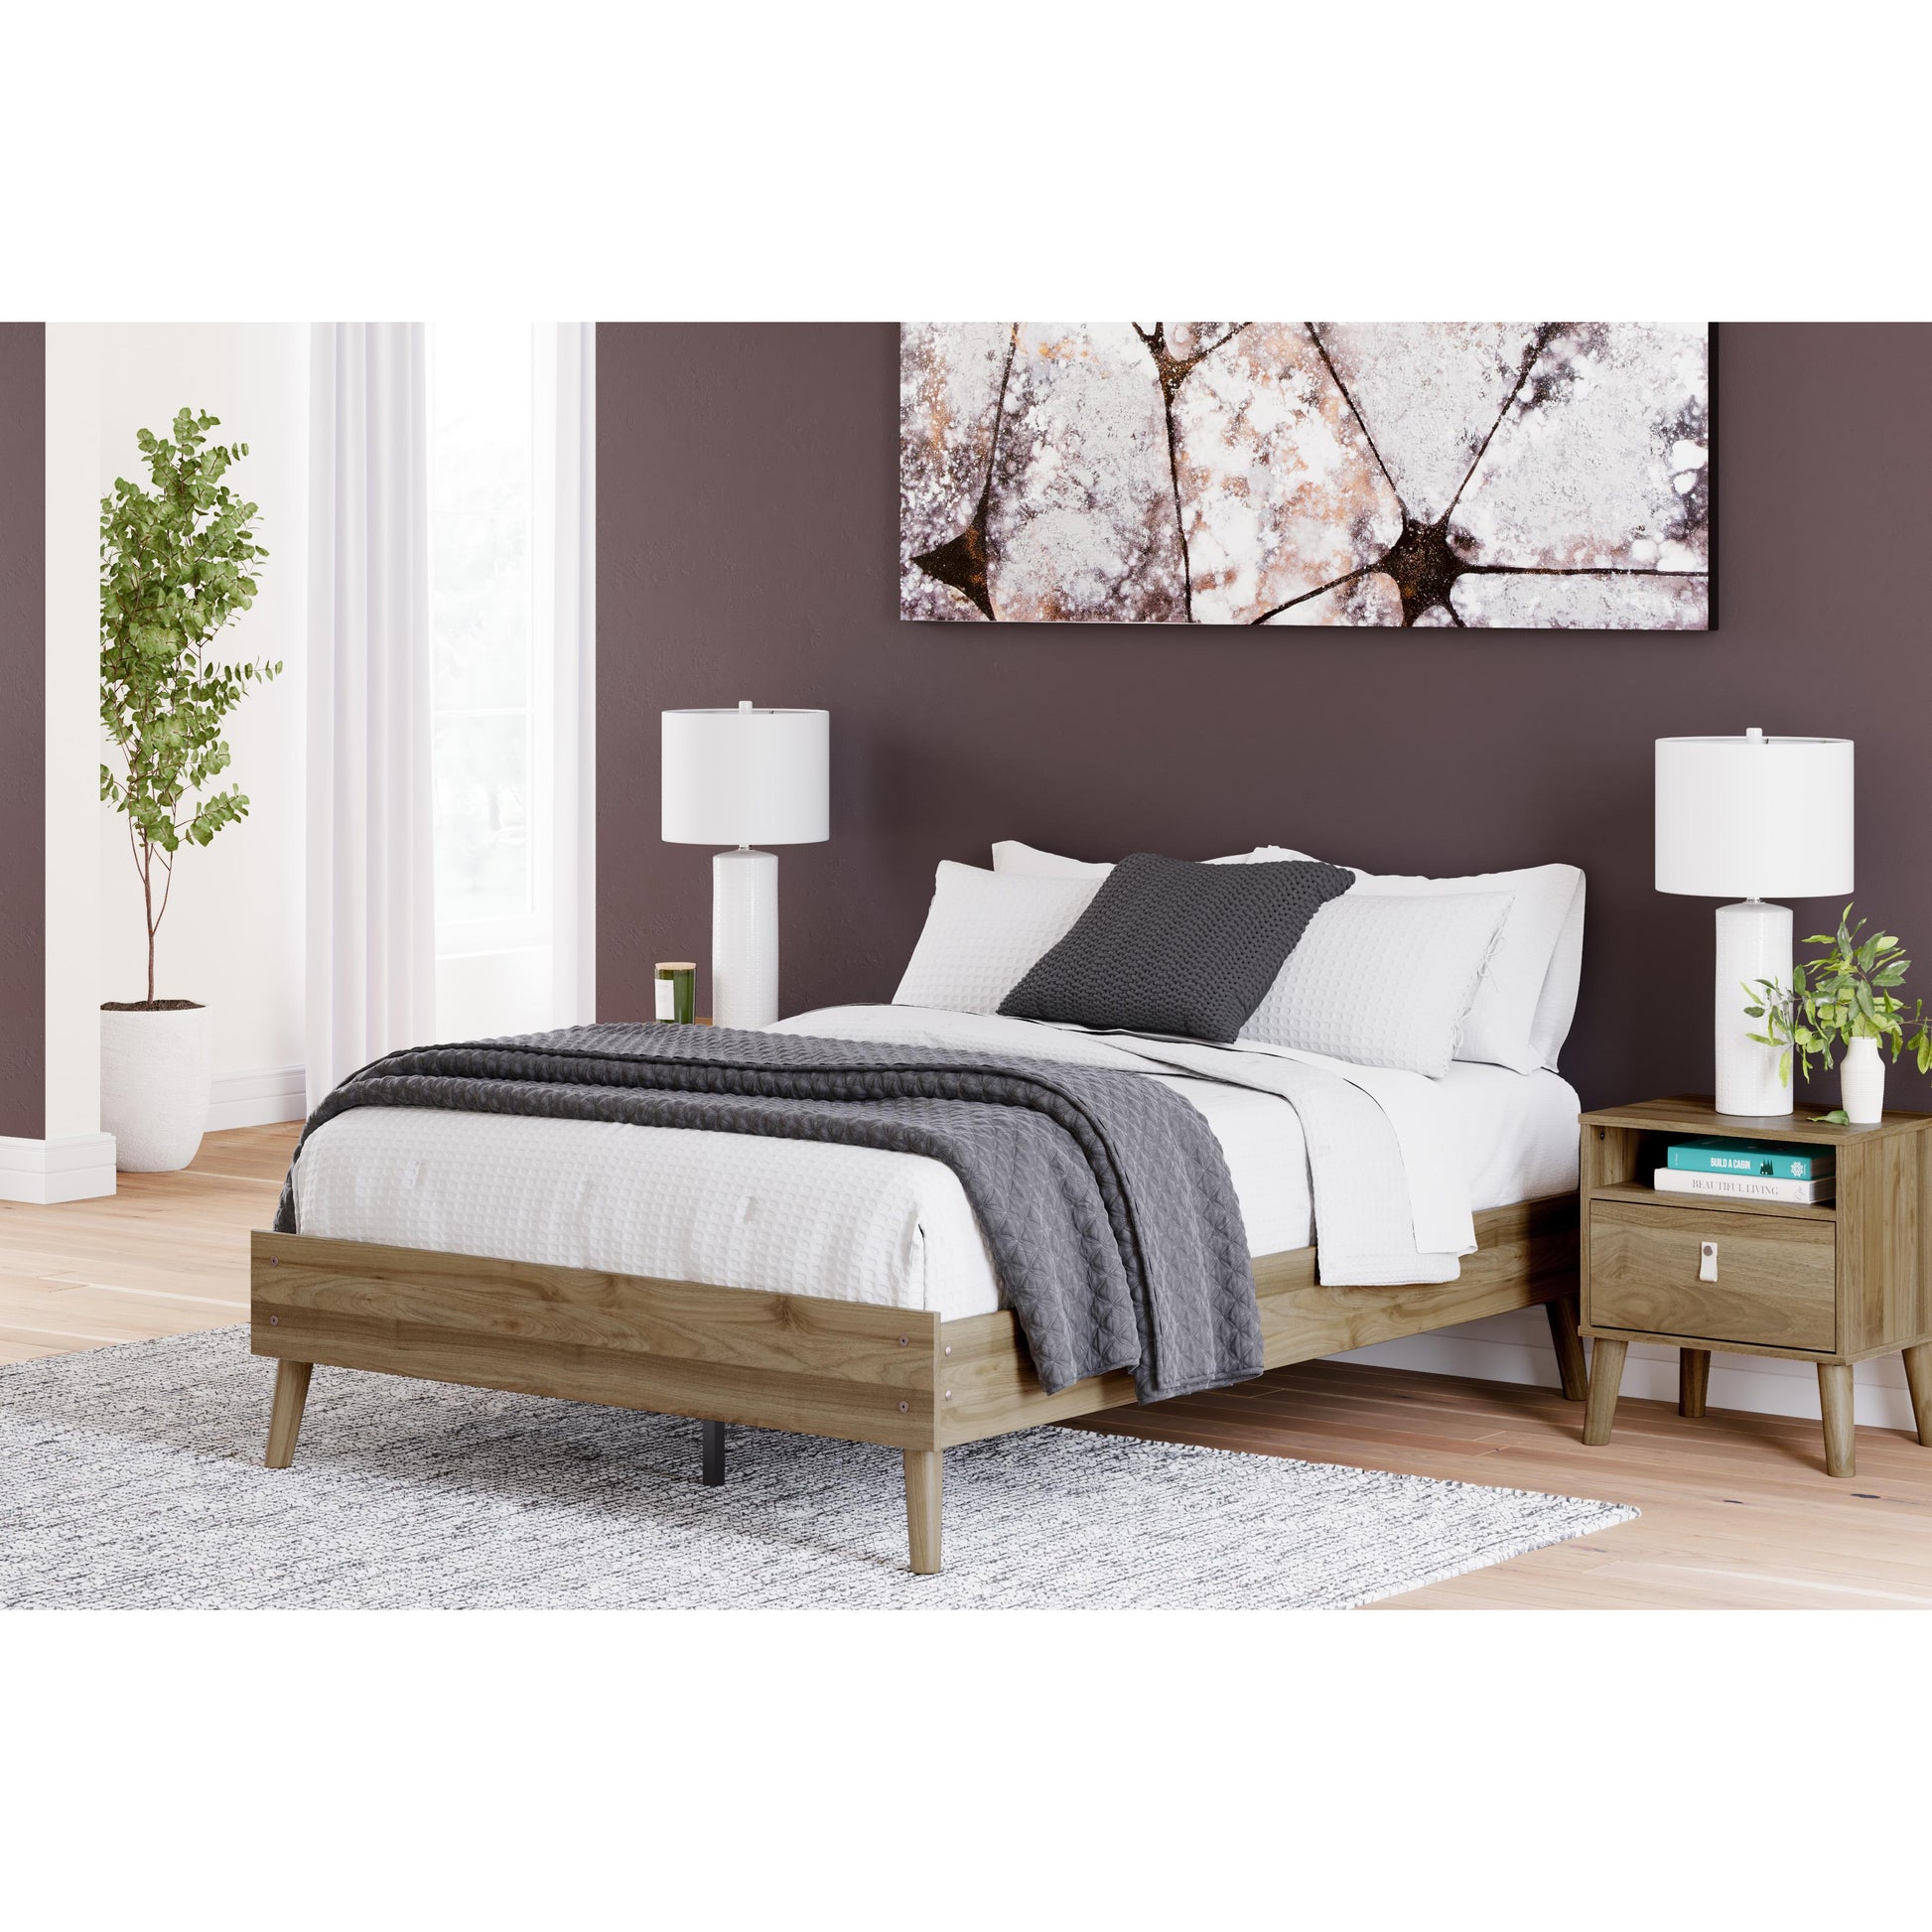 Signature Design by Ashley Kids Beds Bed EB1187-112 IMAGE 6